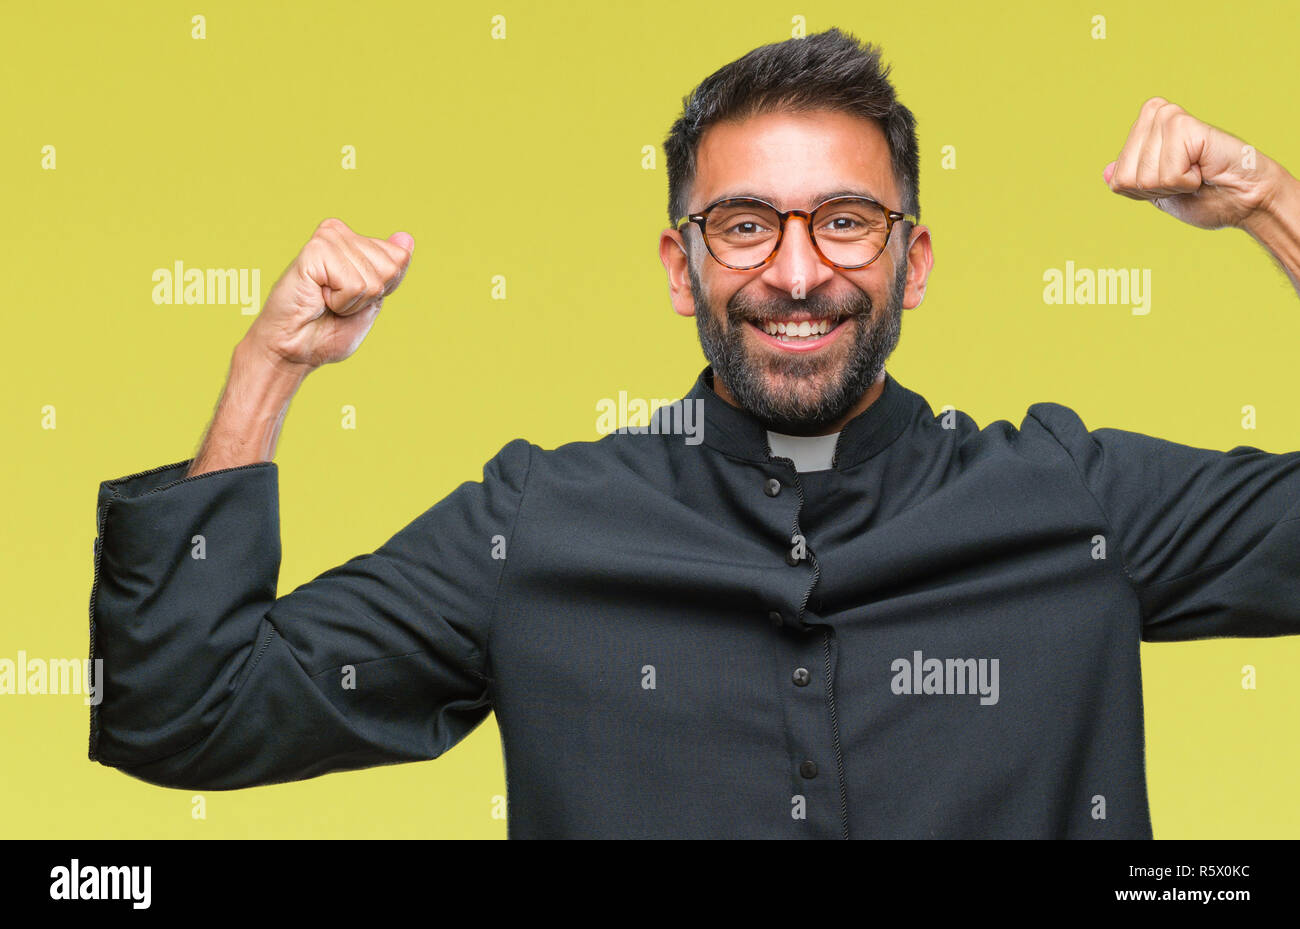 Adult hispanic catholic priest man over isolated background showing arms muscles smiling proud. Fitness concept. Stock Photo